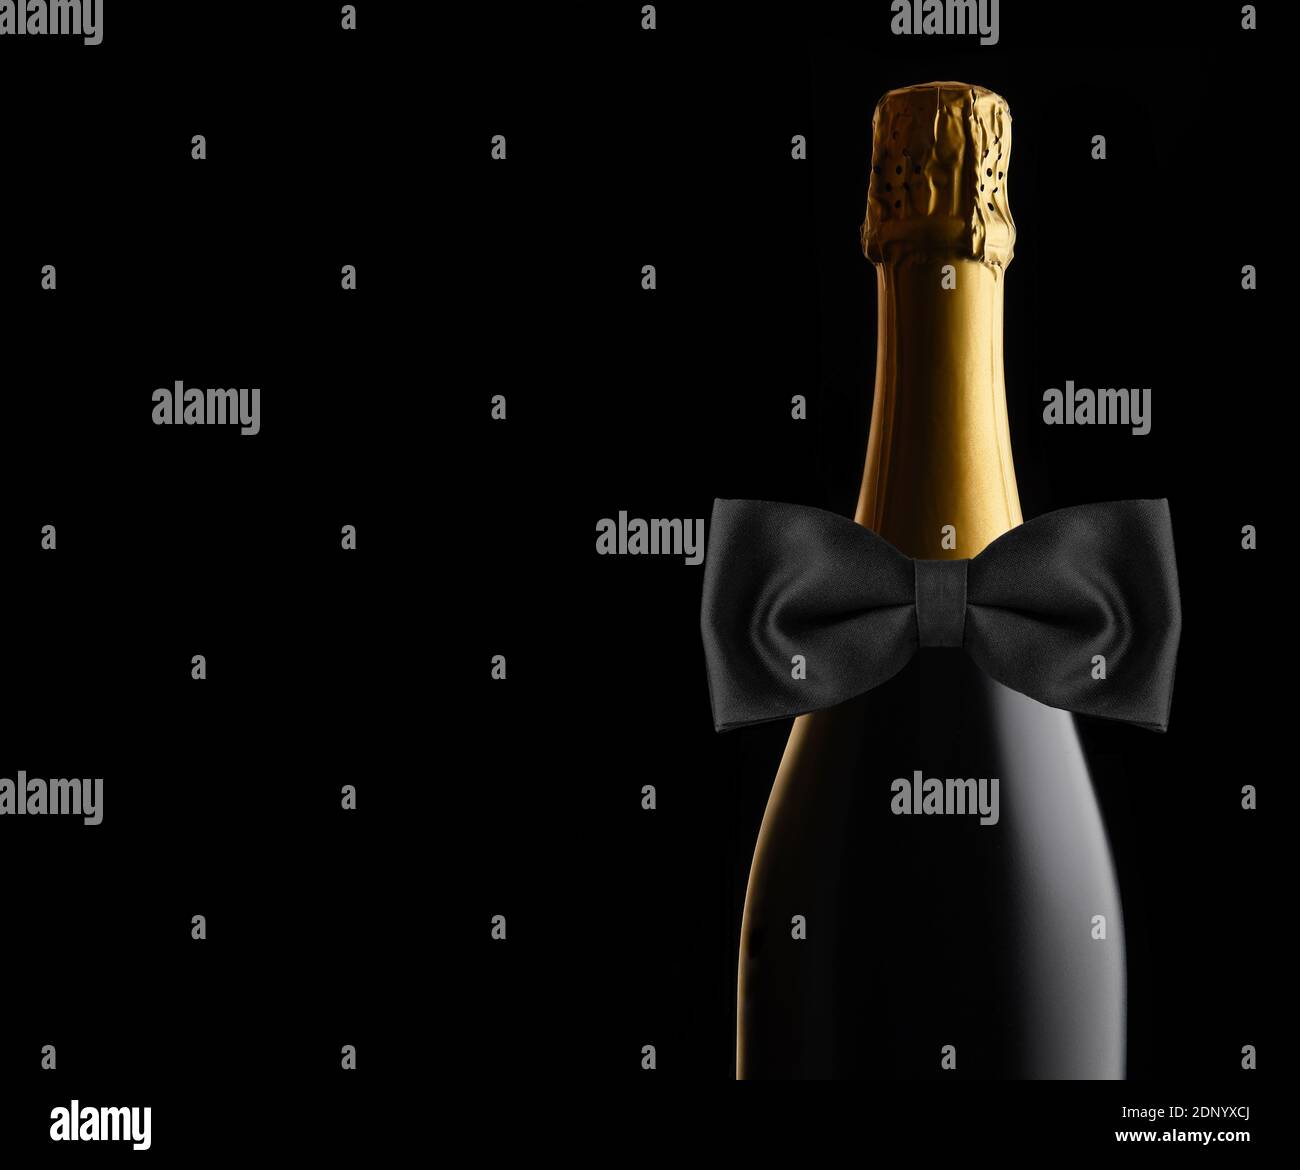 Closeup of an unopened bottle of Champagne against a black background with Black Bow Tie. Ideal for Wedding, Anniversary or New Years Projects, with c Stock Photo